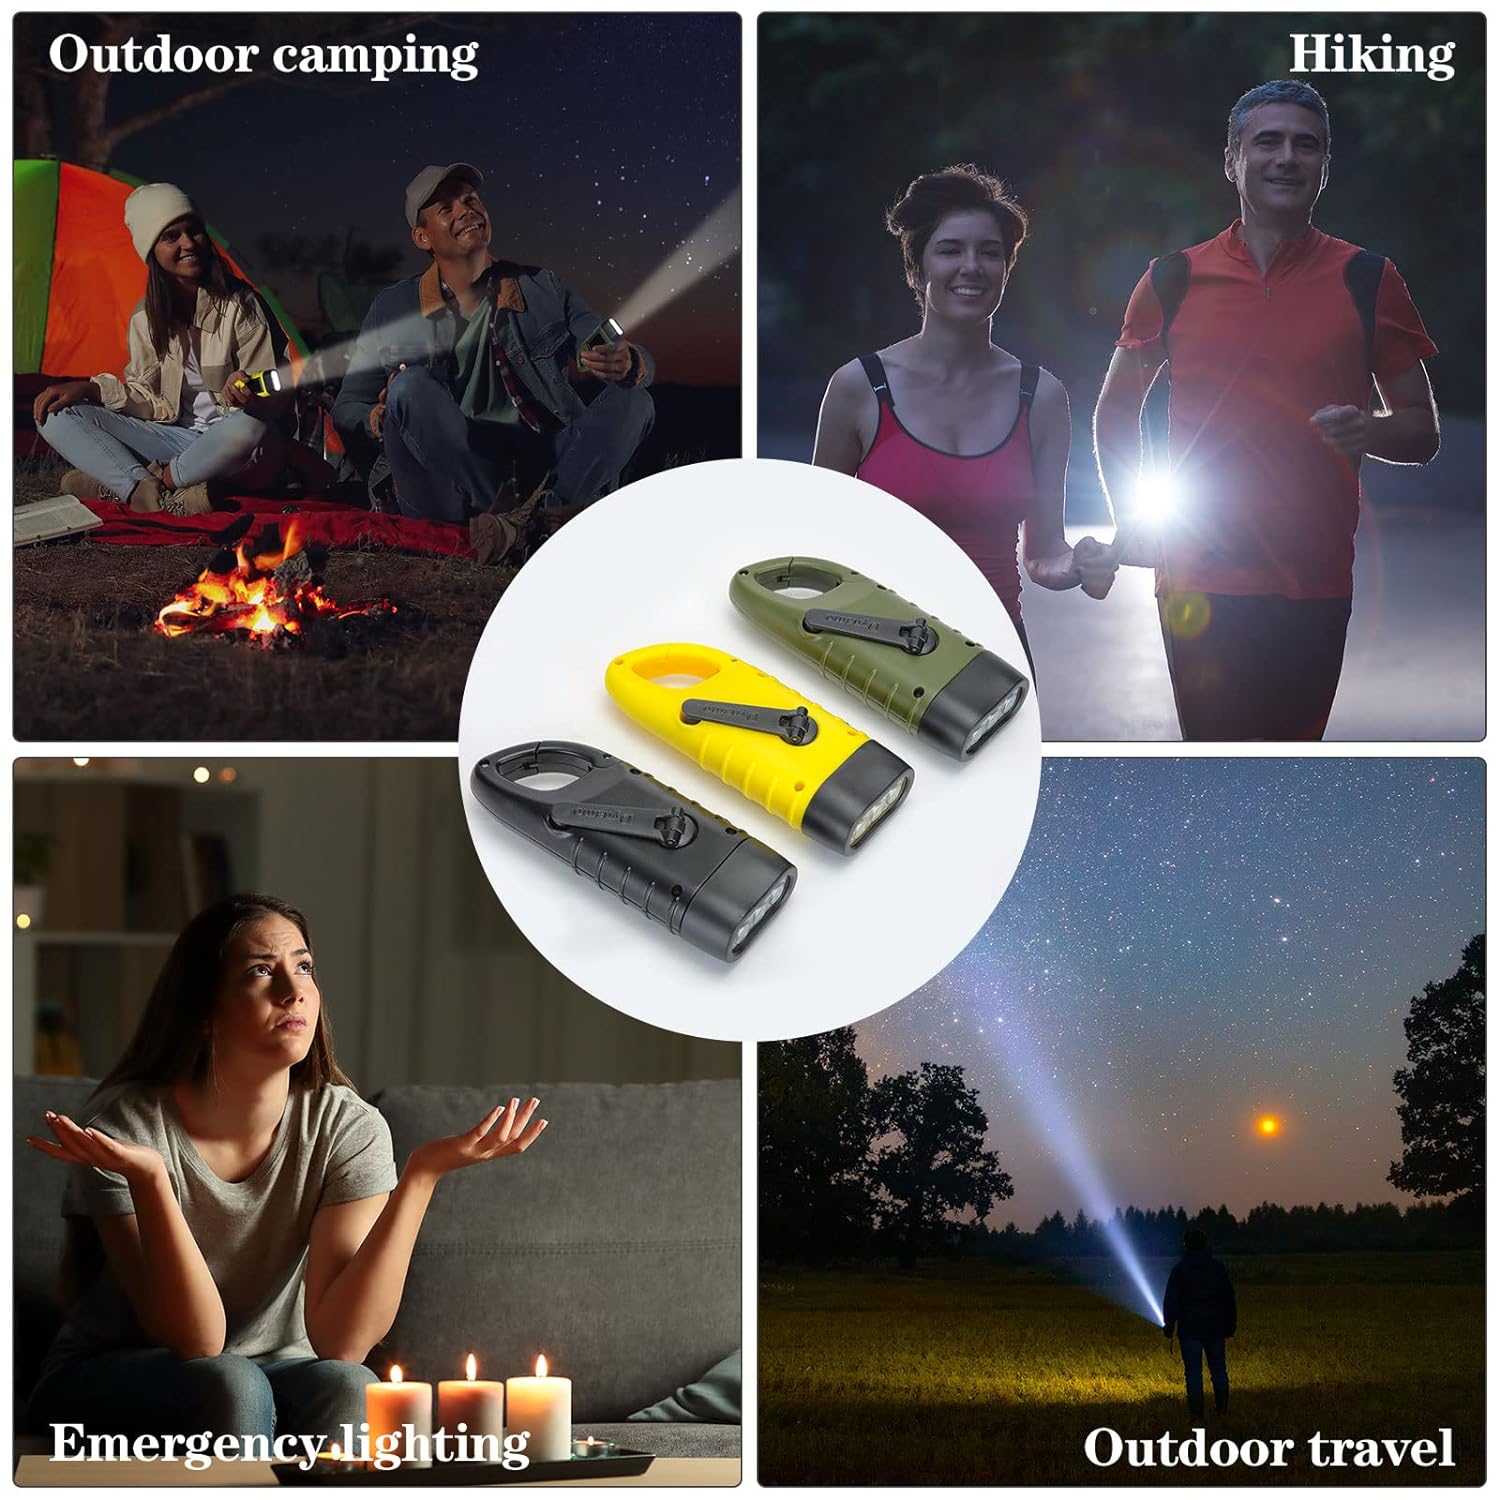 6 Pcs Hand Crank Solar Powered Flashlights Emergency Rechargeable LED Flashlights Handheld Flashlights for Emergencies Survival Gear Outdoor Sports Camping Hiking Backpack Safety, Green Yellow Black